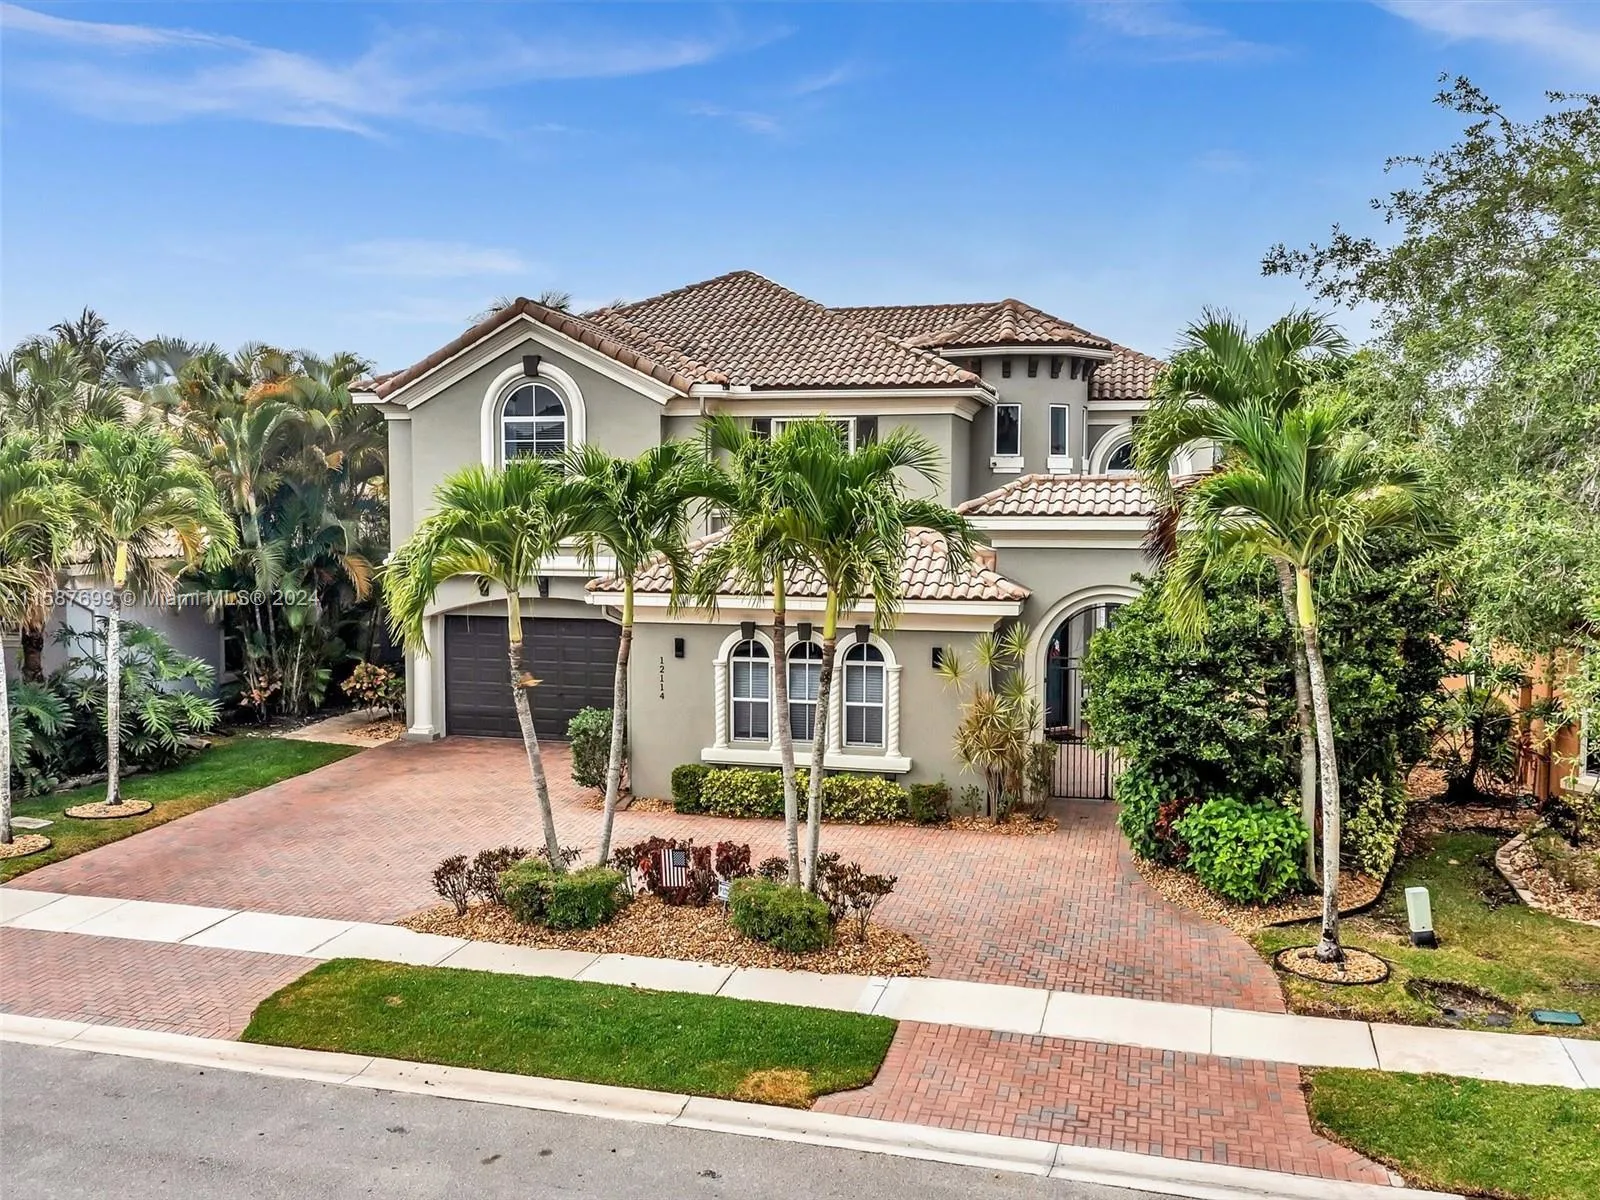 Amazing curb appeal with circular driveway and lush landscaping!